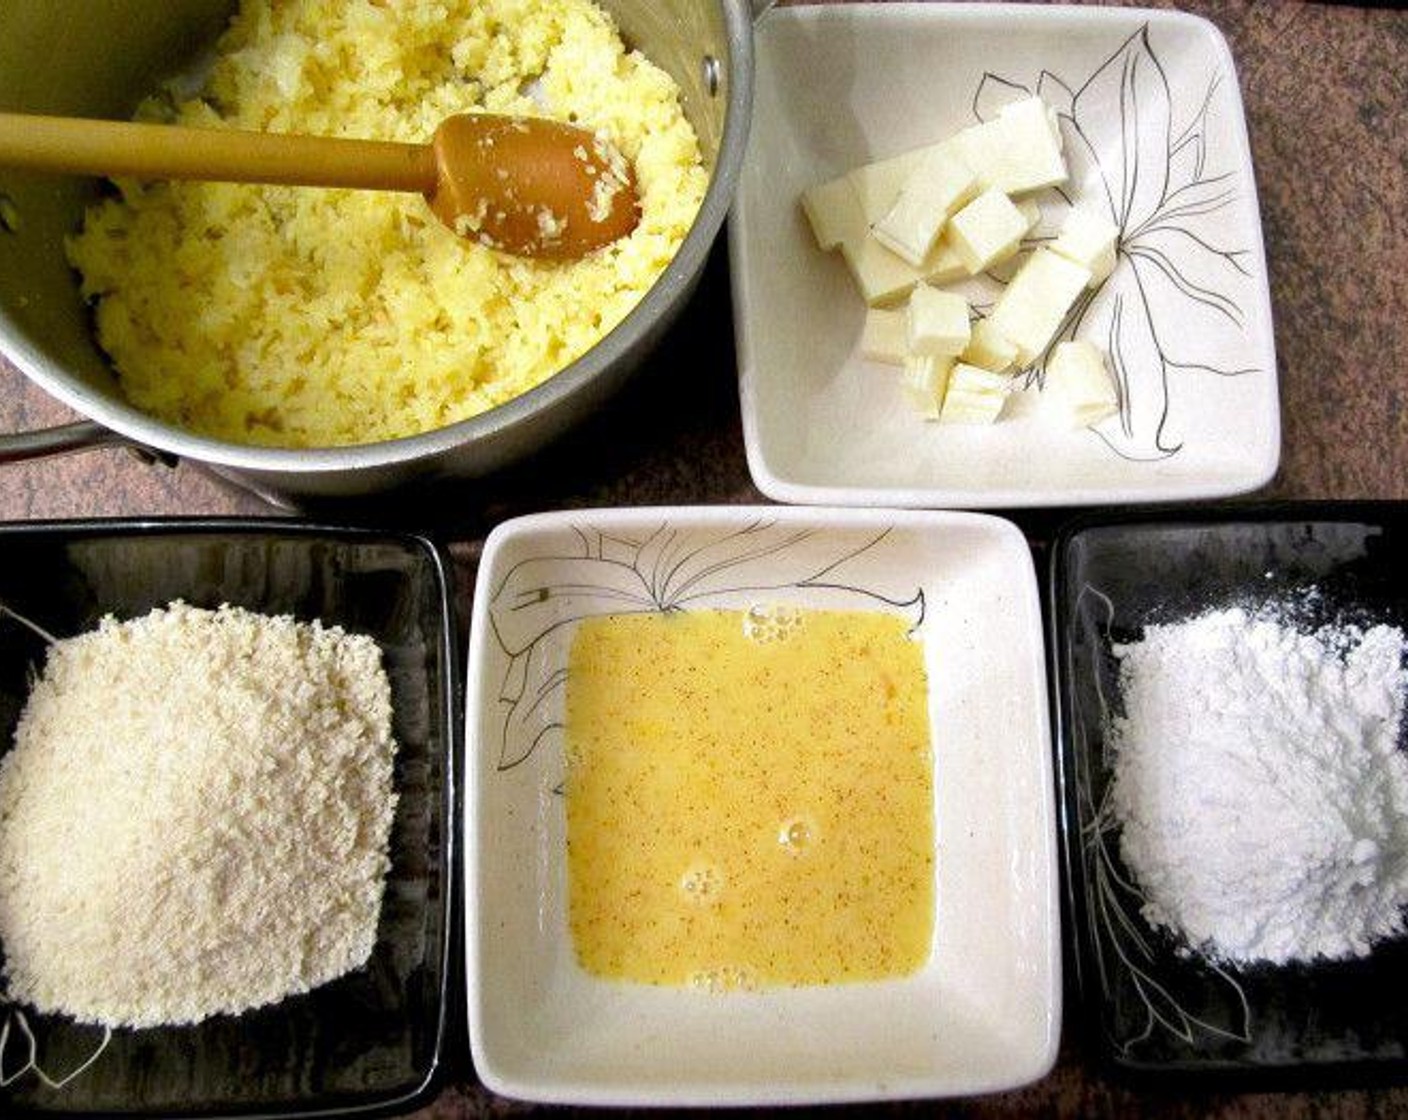 step 5 Form the rice mixture into 12 patties. Press each into one hand, add Bocconcini (12 pieces) and close the disk. Roll between two hands to form even balls. Then evenly coat each ball in the whisked egg, All-Purpose Flour (1/2 cup) and then Breadcrumbs (1/2 cup)